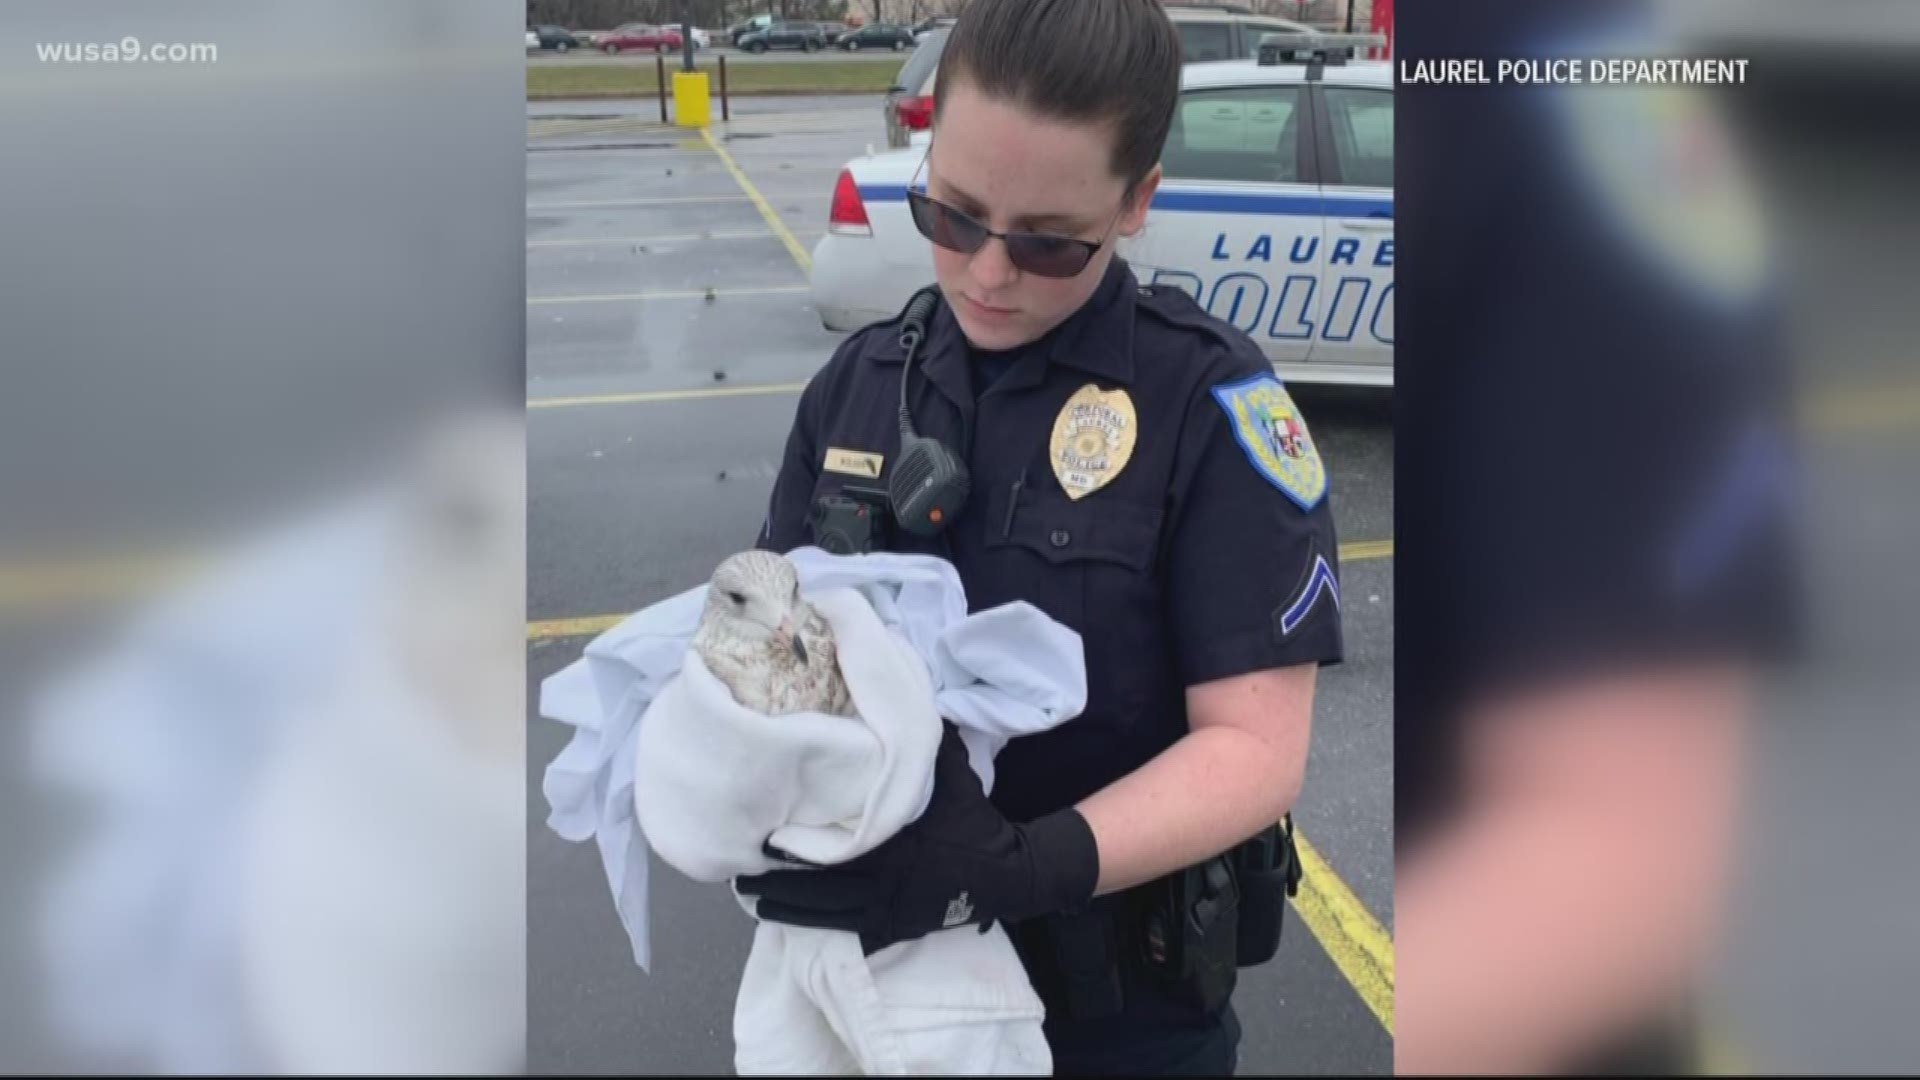 PETA is offering a $5,000 reward to help track down the person who went out of their way to kill several seagulls in Laurel.